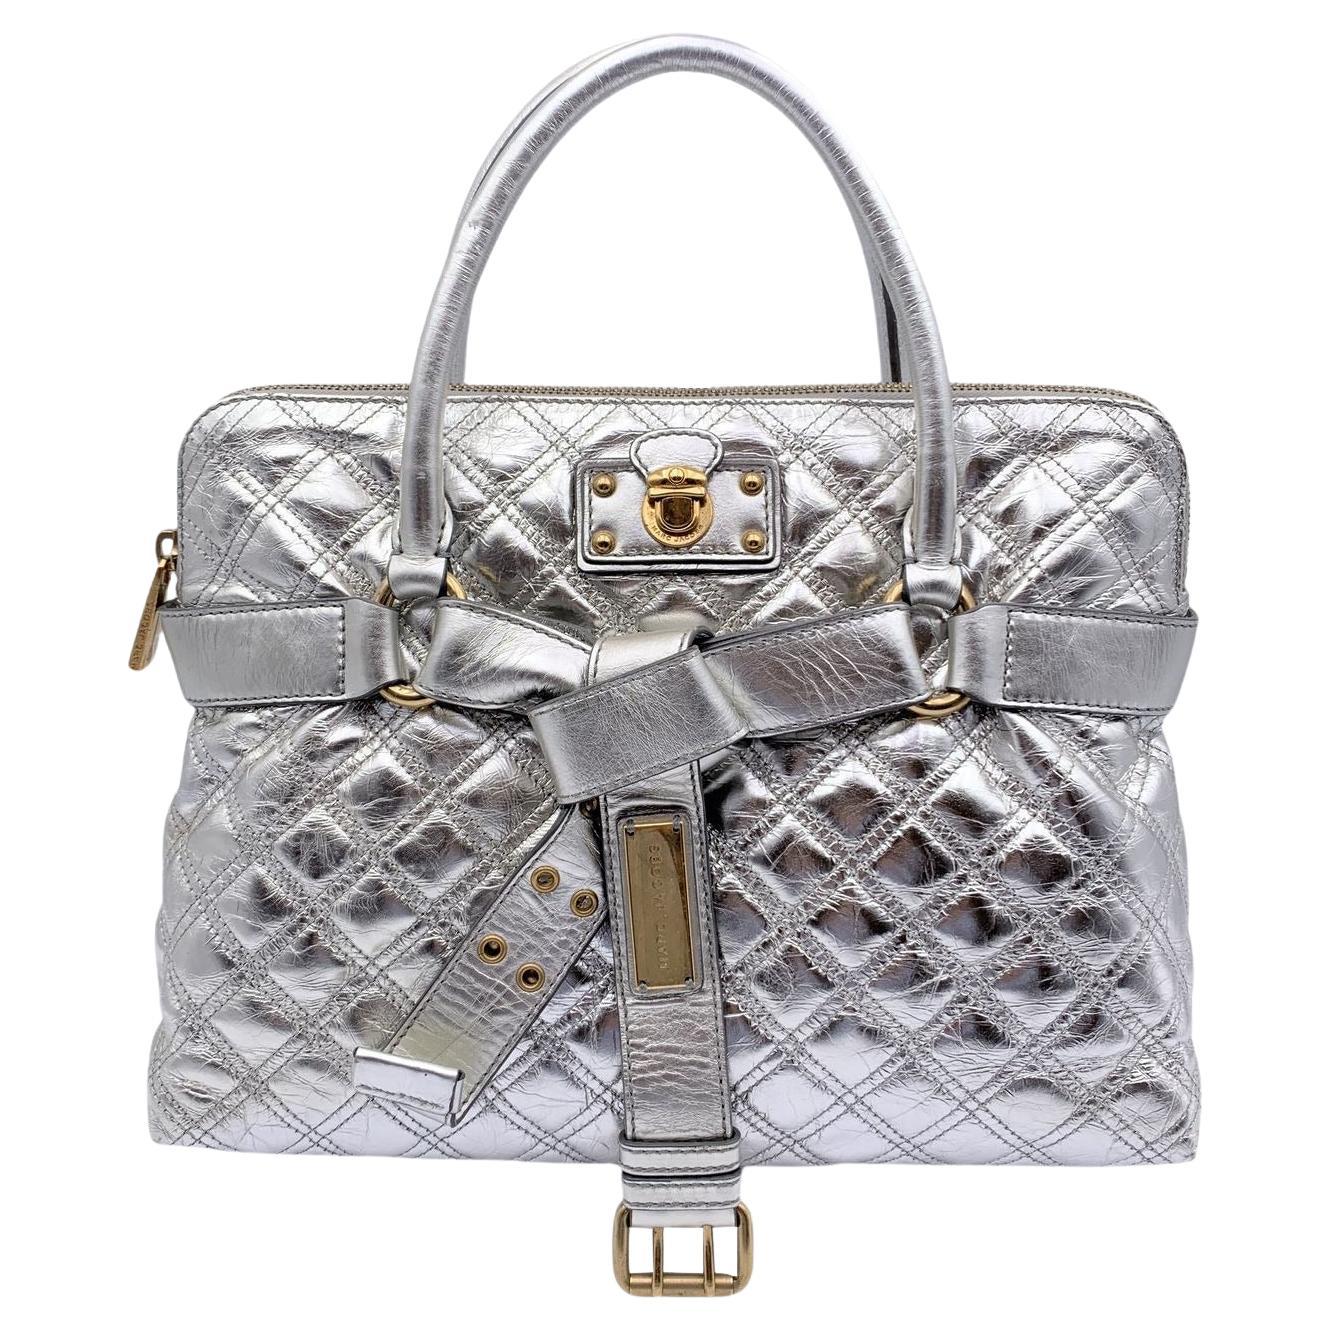 Marc Jacobs Silver Tone Quilted Leather Bruna Tote Bag